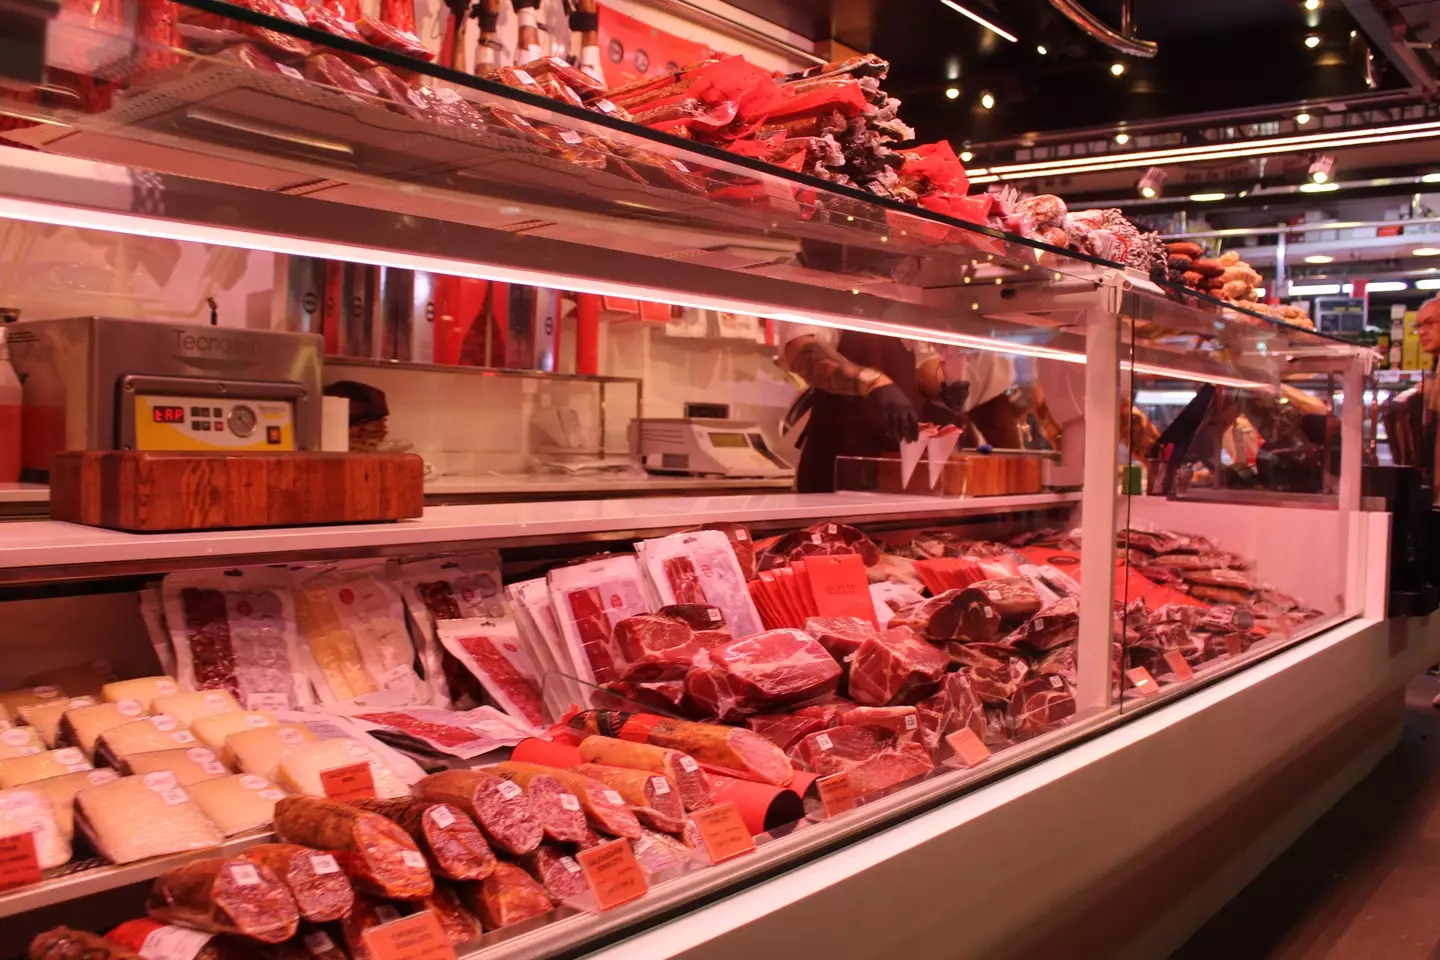 Last month, Australian officials detected foot and mouth disease in pork products in a Melbourne supermarket.